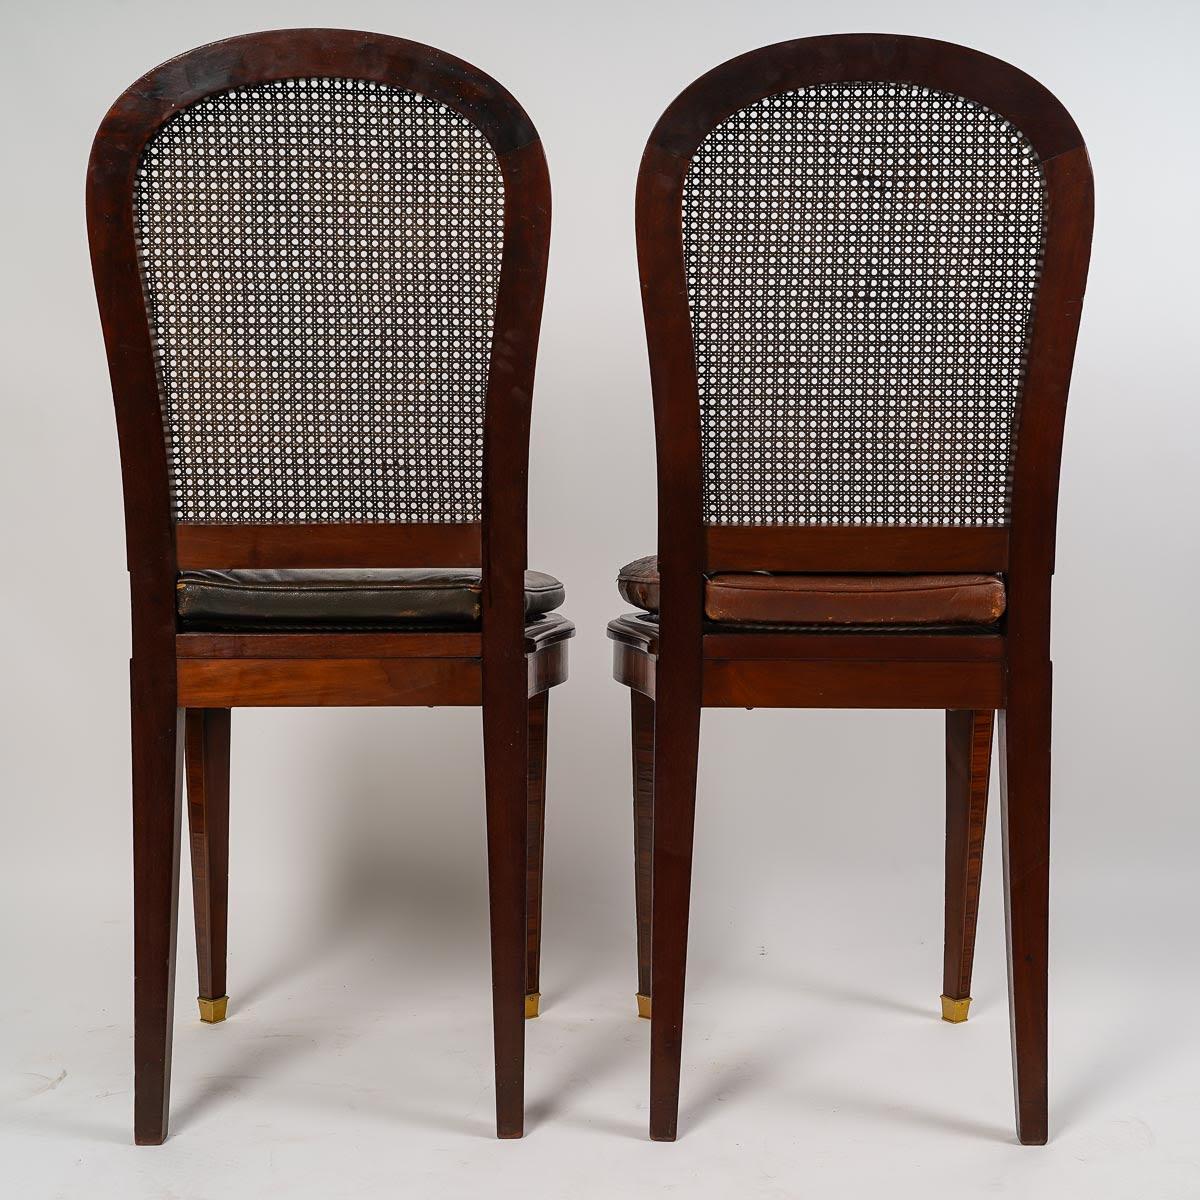 Pair of 19th Century Chairs in the Louis XVI Style. For Sale 2